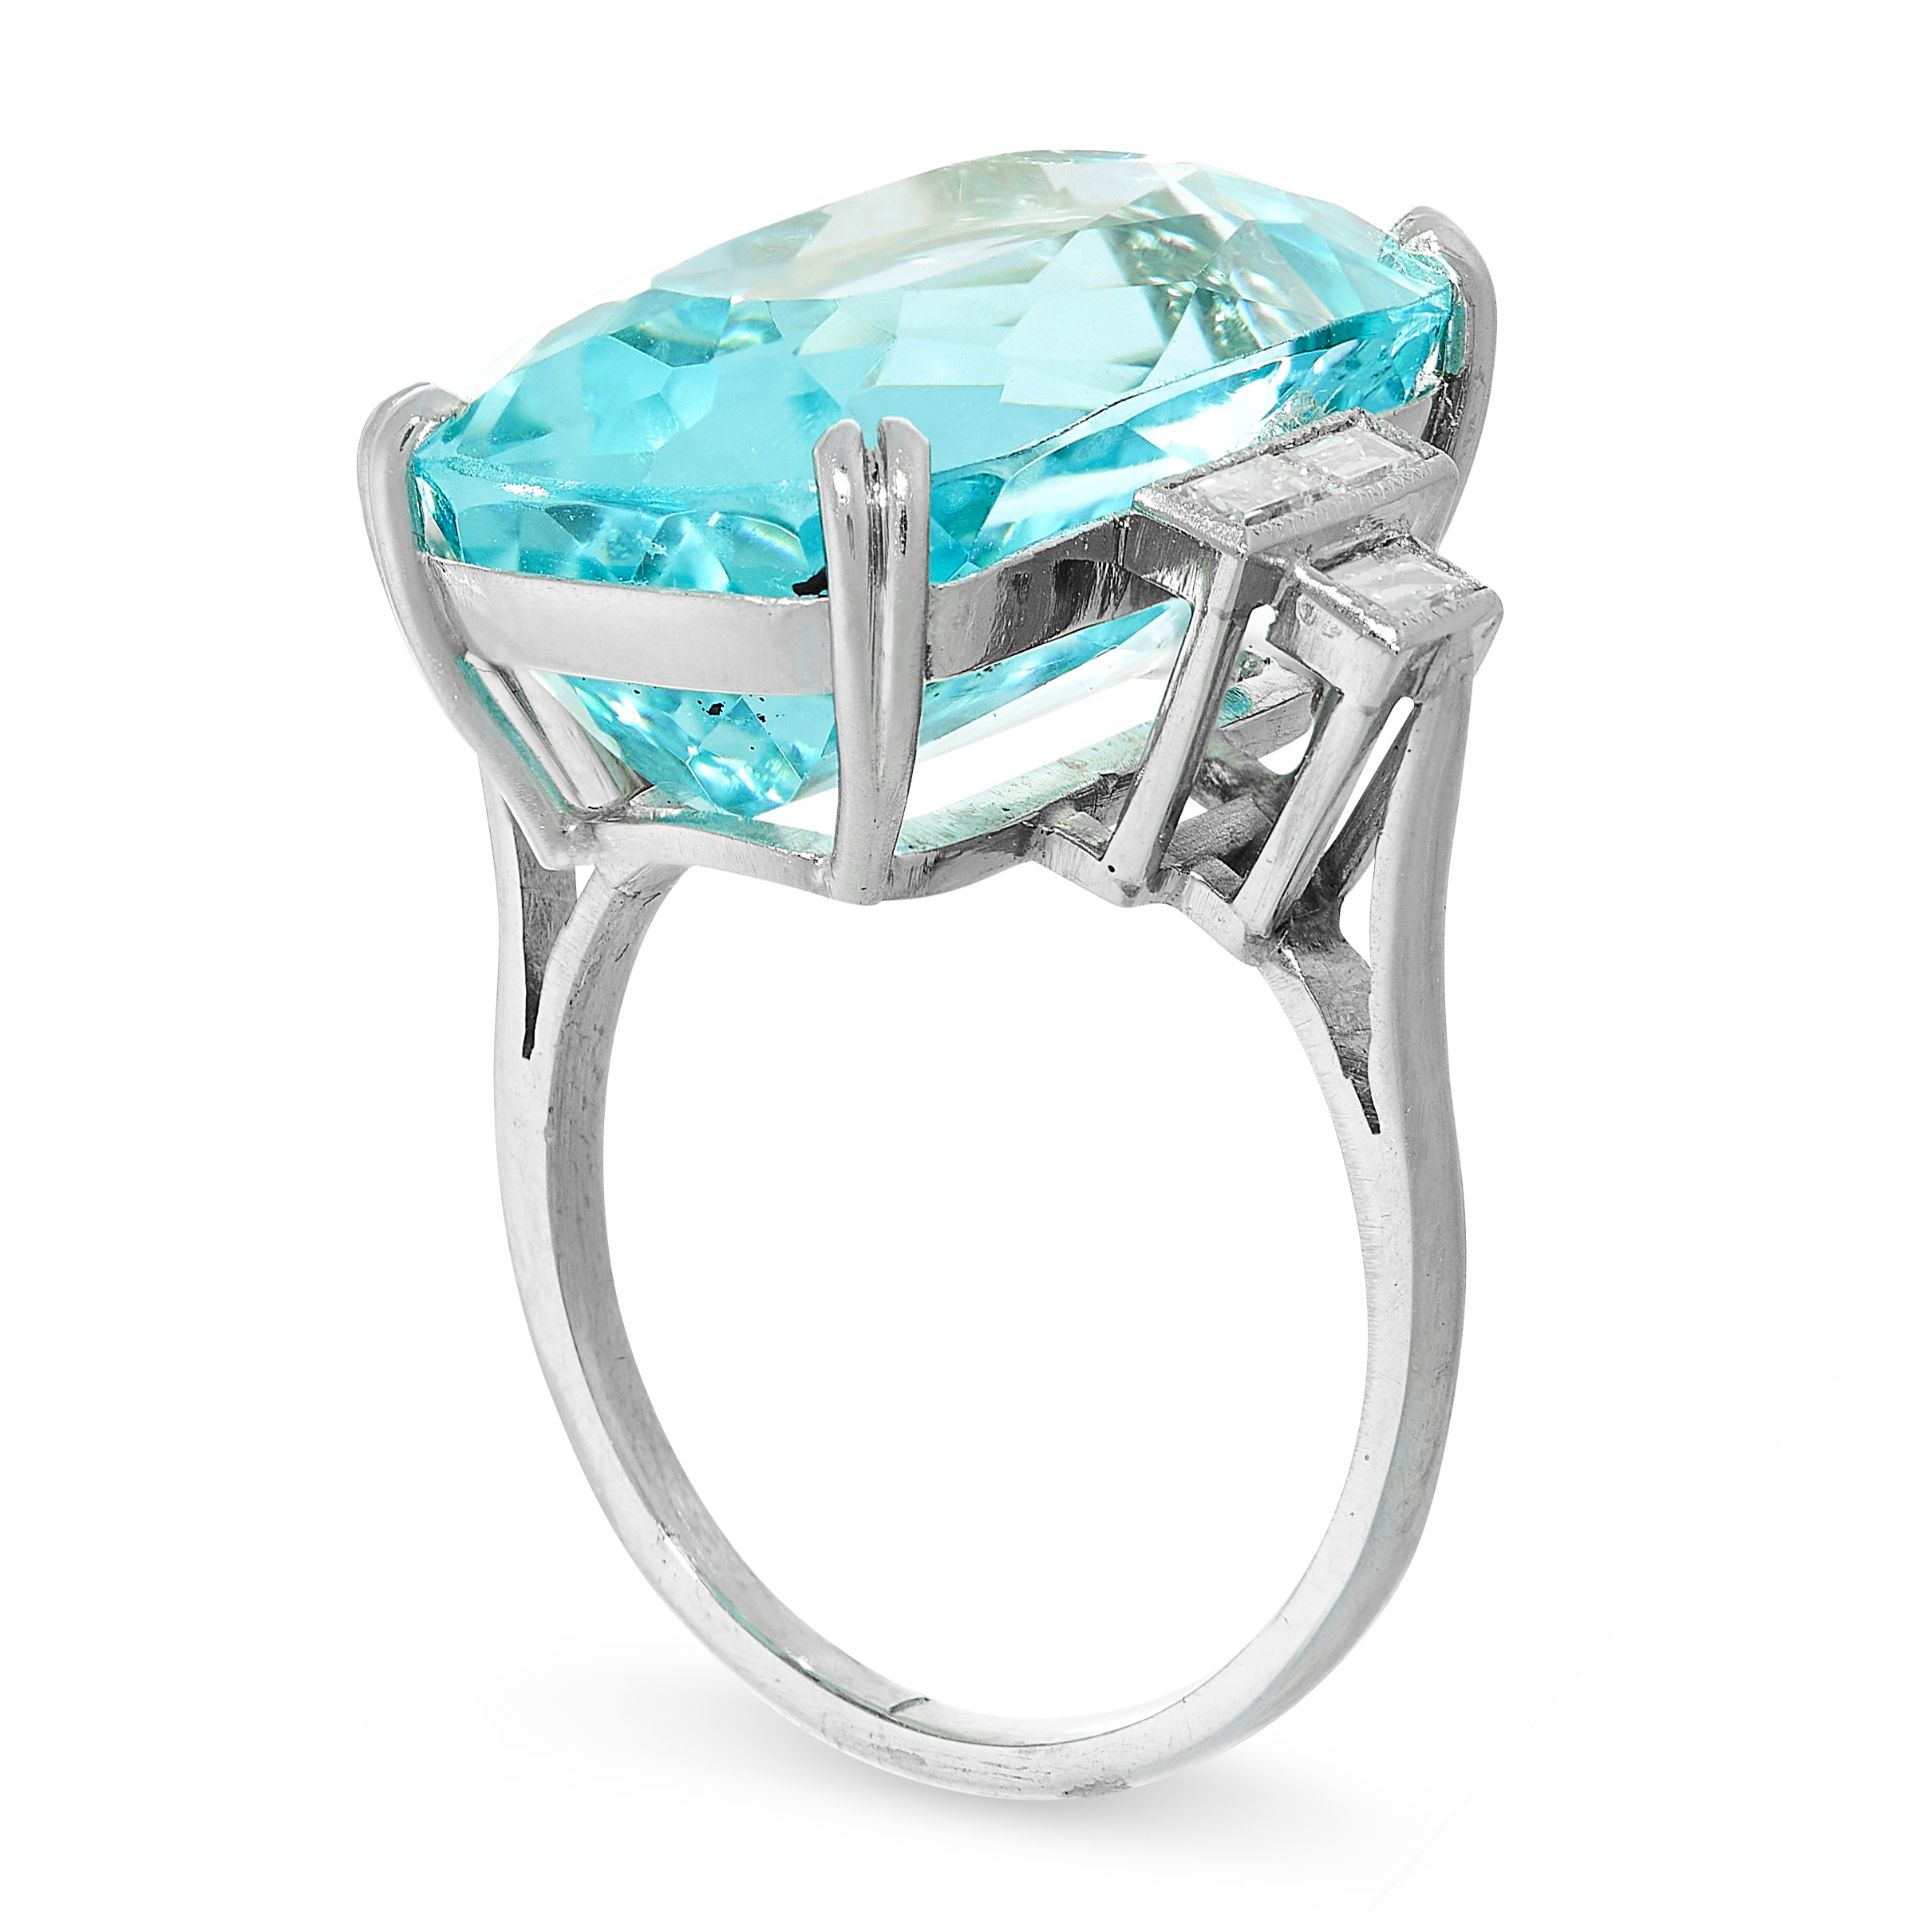 AQUAMARINE AND DIAMOND RING claw set with a cushion shaped aquamarine of 17.94 carats, accented by - Image 2 of 3